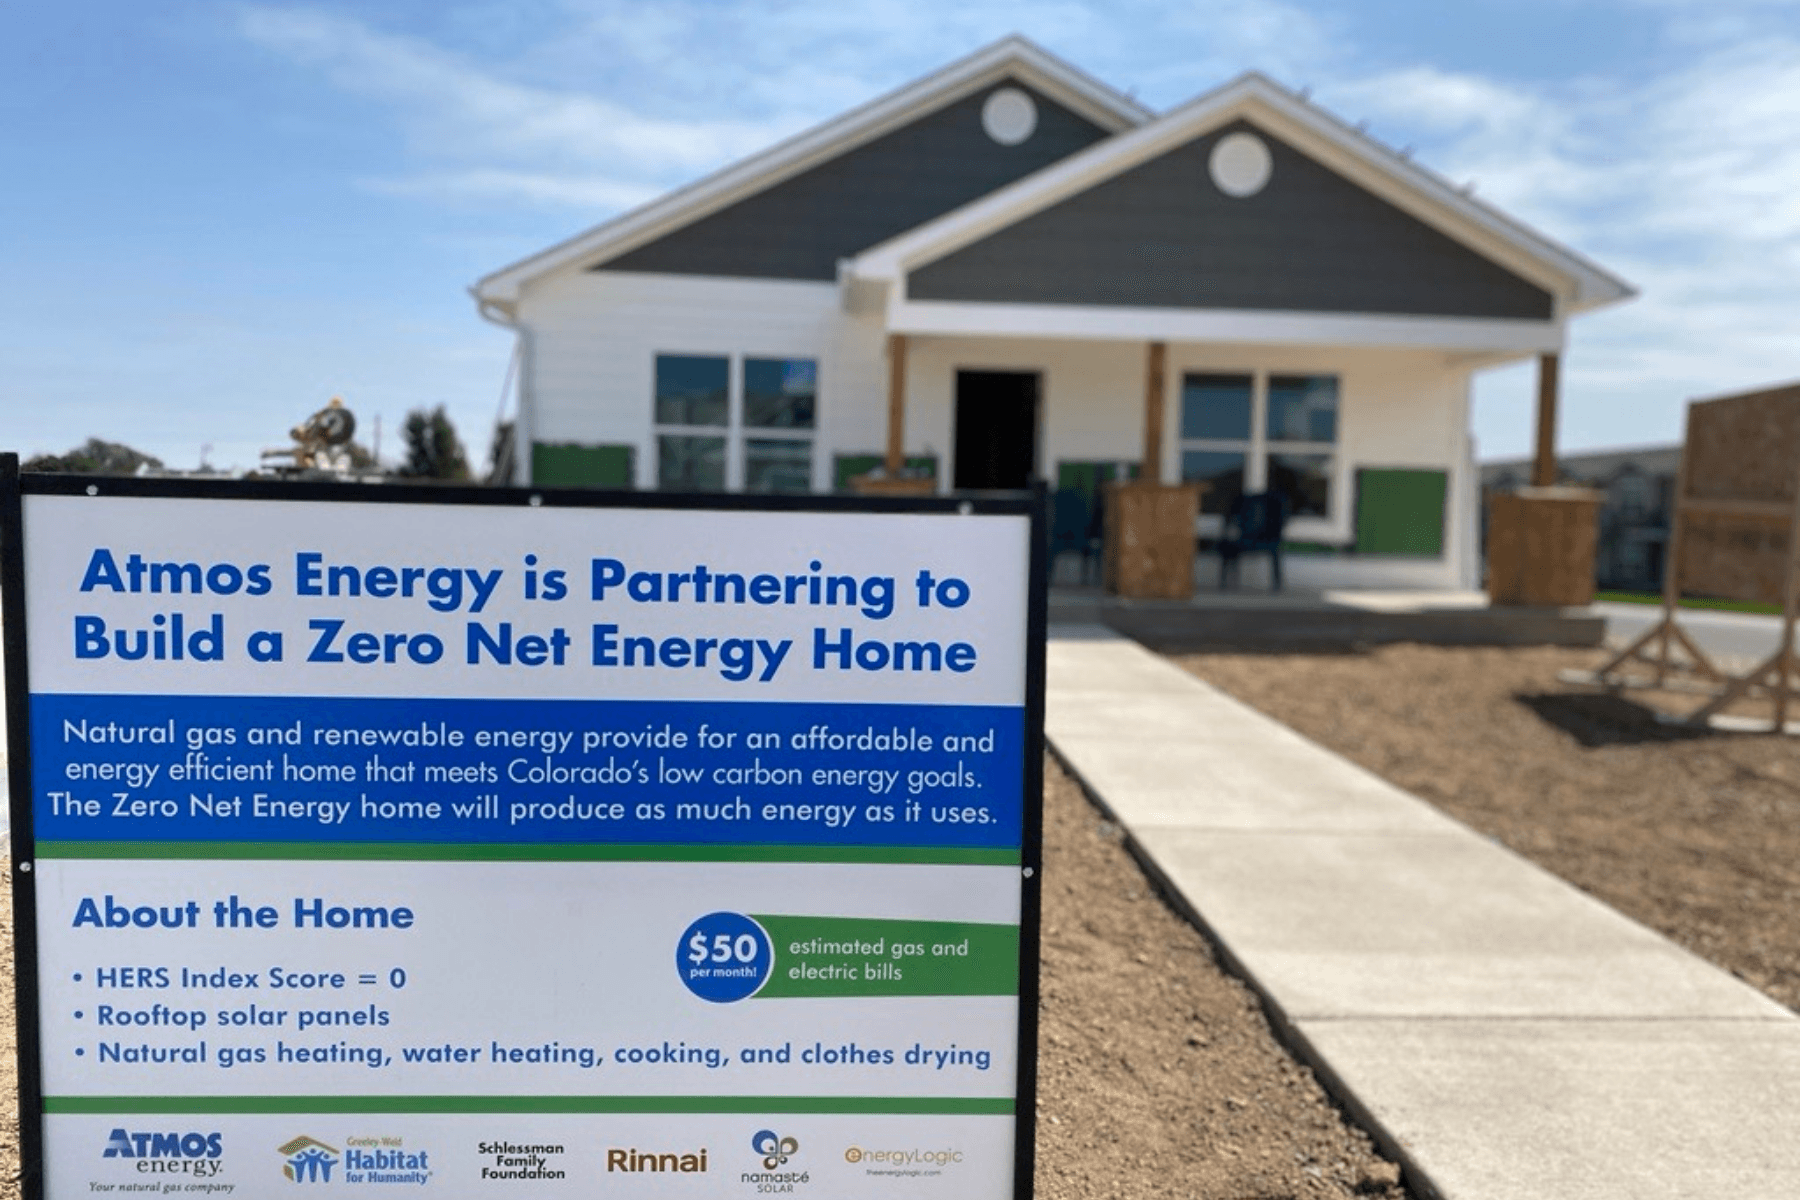 Habitat For Humanity To Build Subdivision Of 17 Energy-Efficient Homes